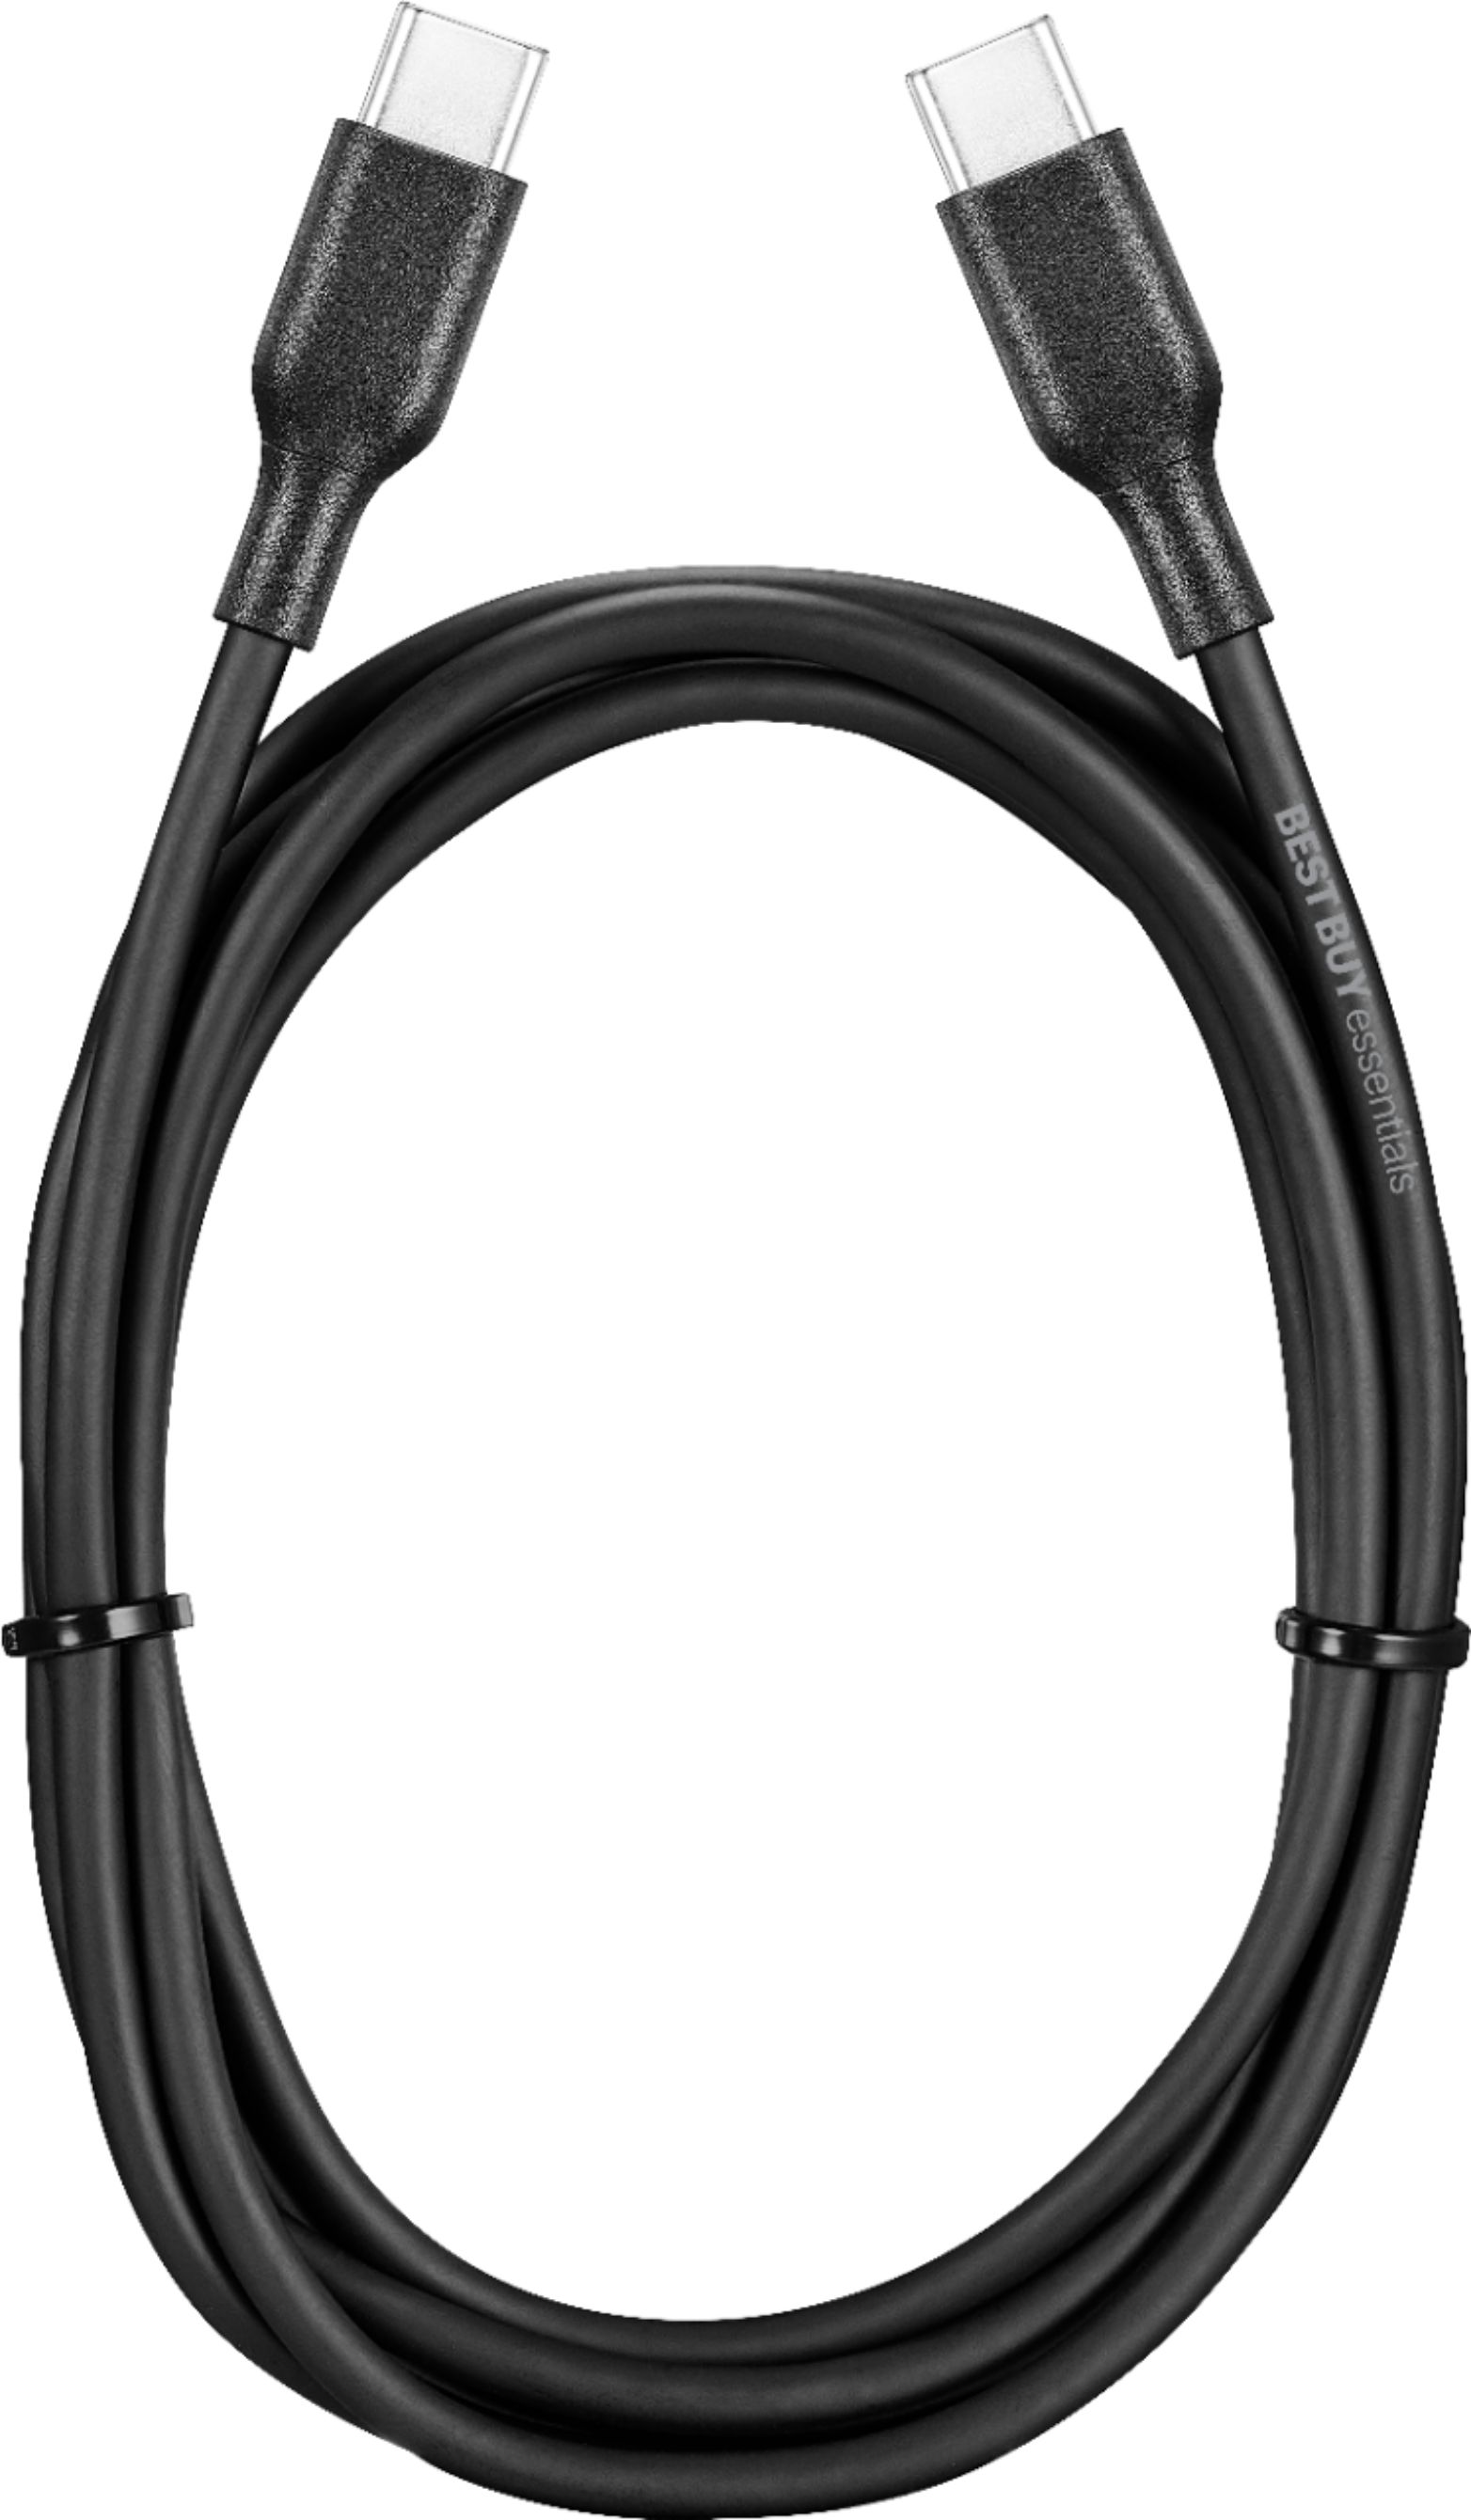 Best Buy essentials™ 6' USB-C to HDMI Cable Black BE-PC3CHD6 - Best Buy